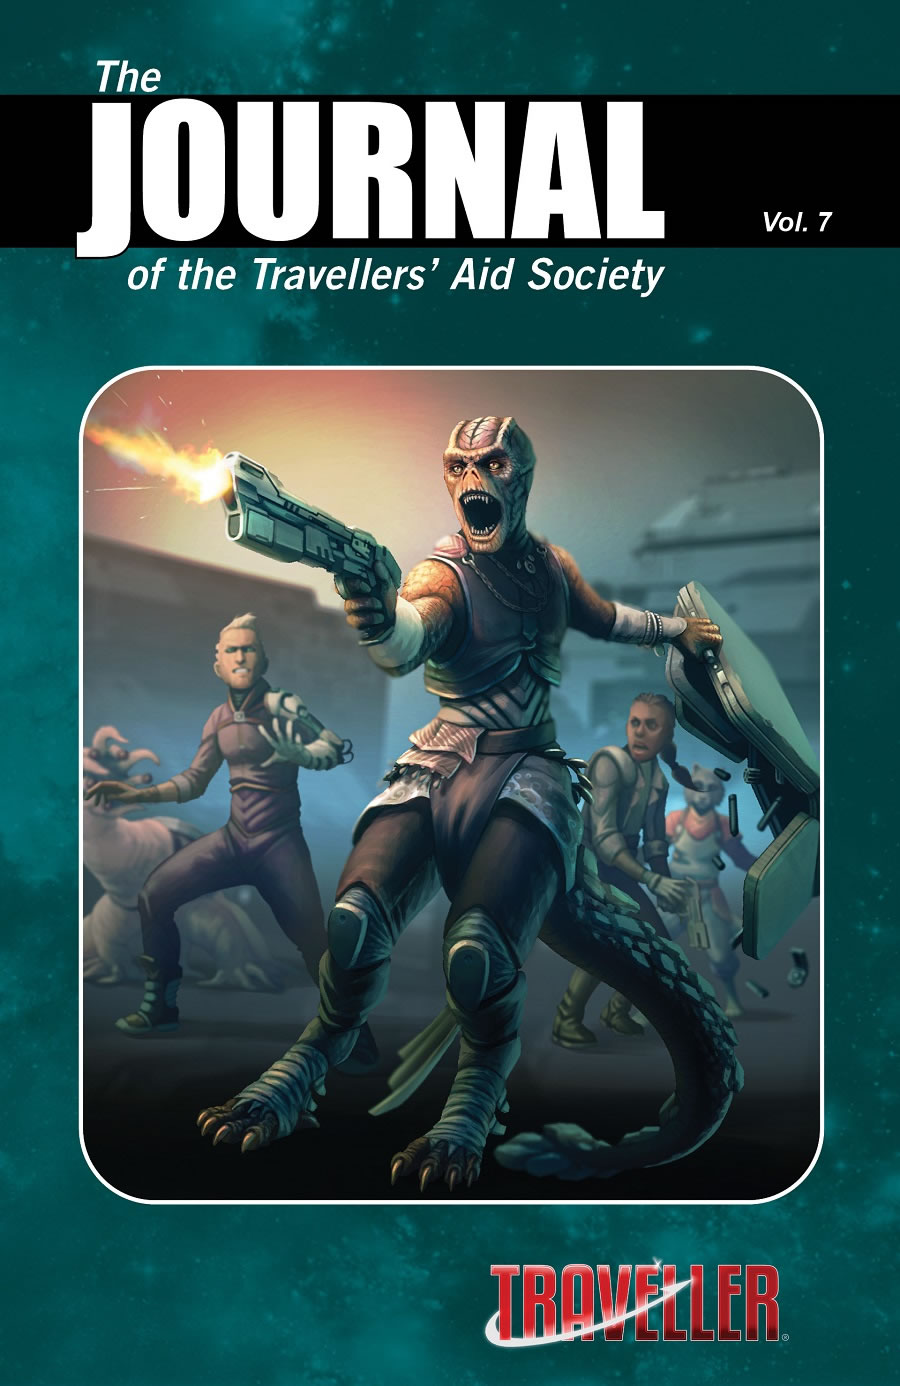 The Journal of Travellers Aid Society Vol.7 